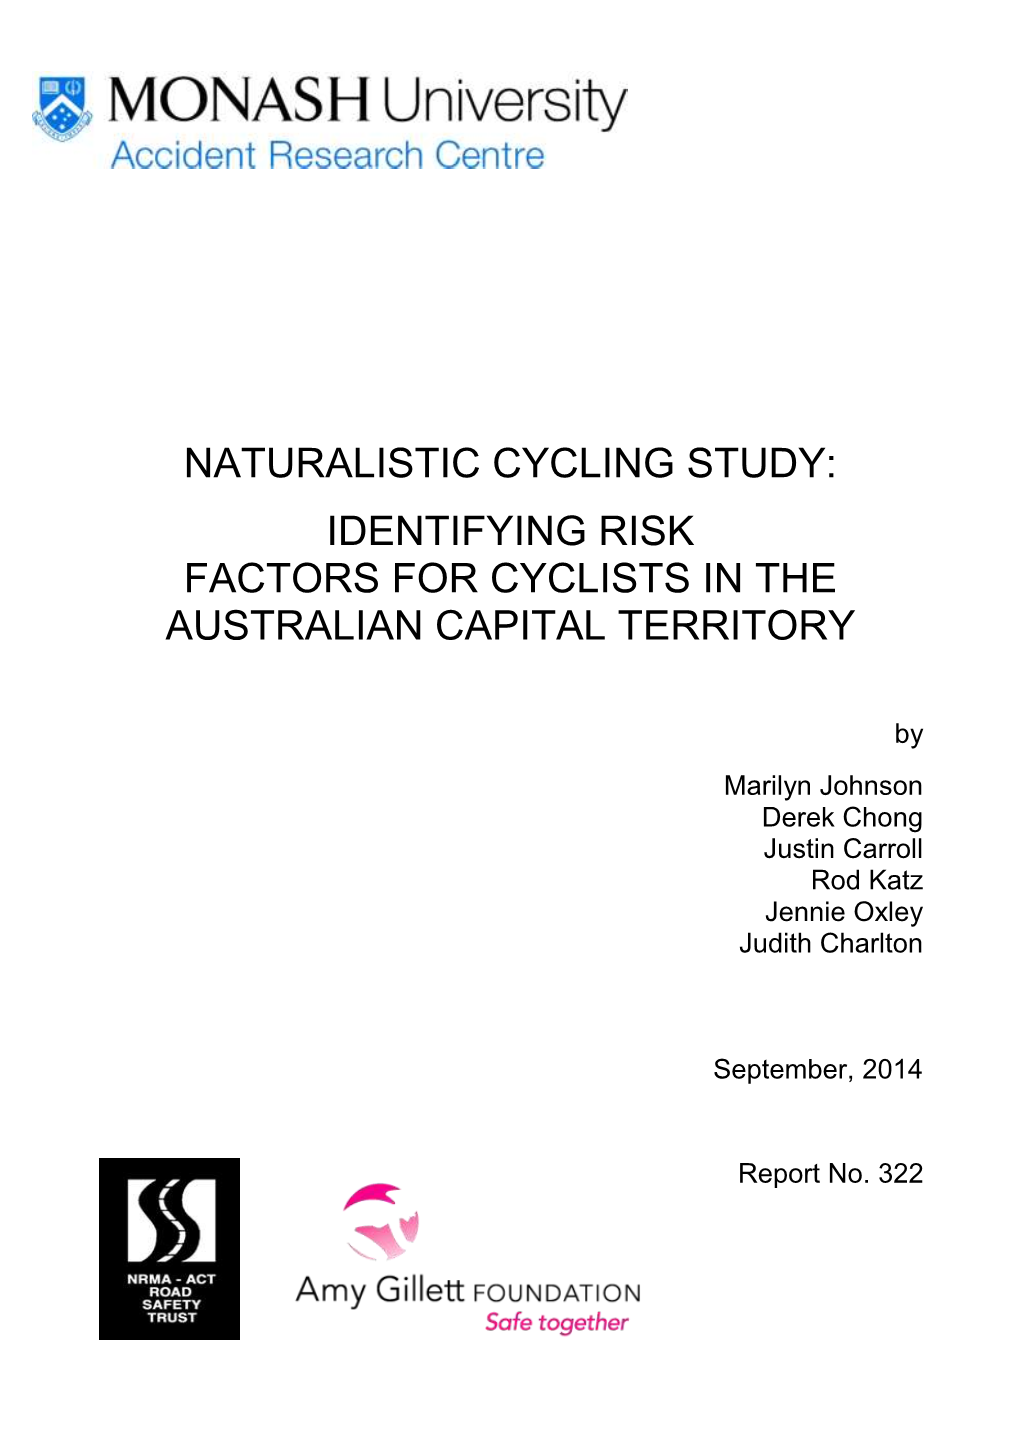 Identifying Risk Factors for Cyclists in the Australian Capital Territory